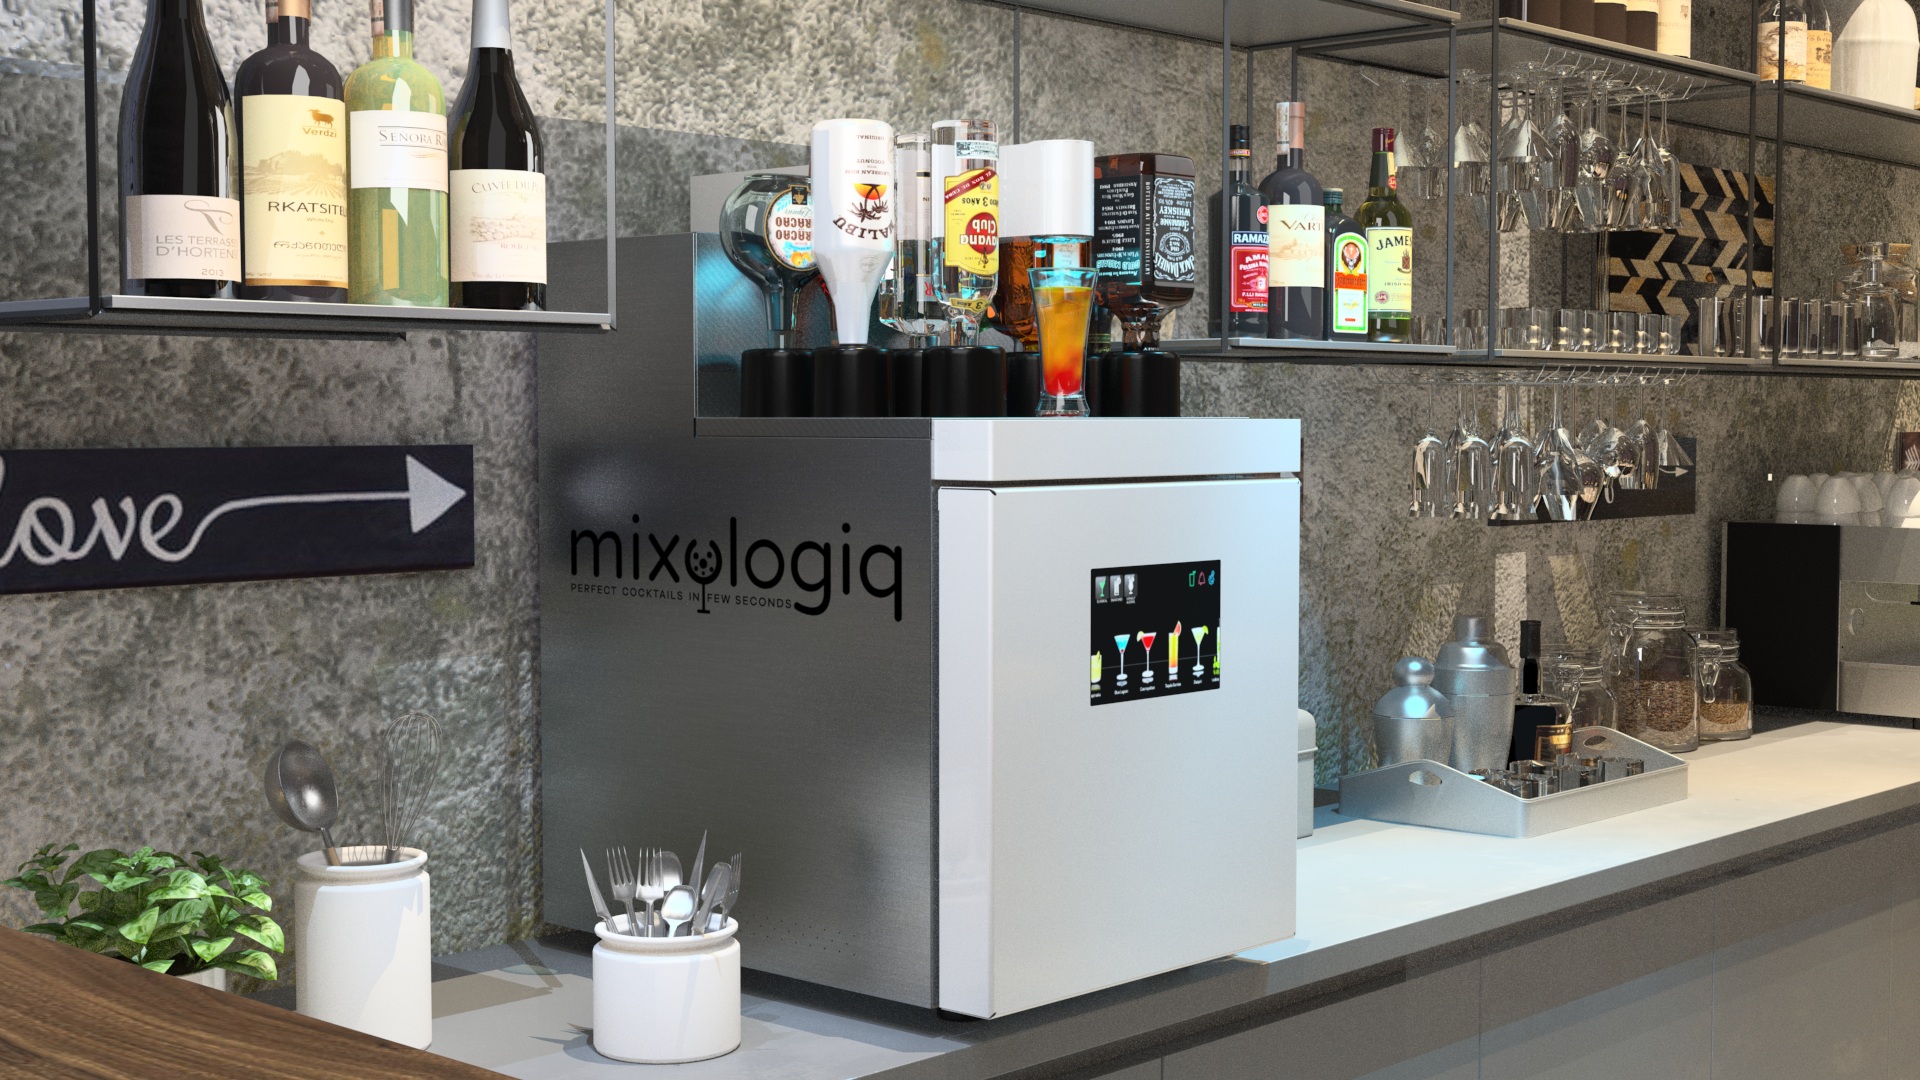 Mixologo - The first cocktails machine - Perfect cocktails in a few seconds